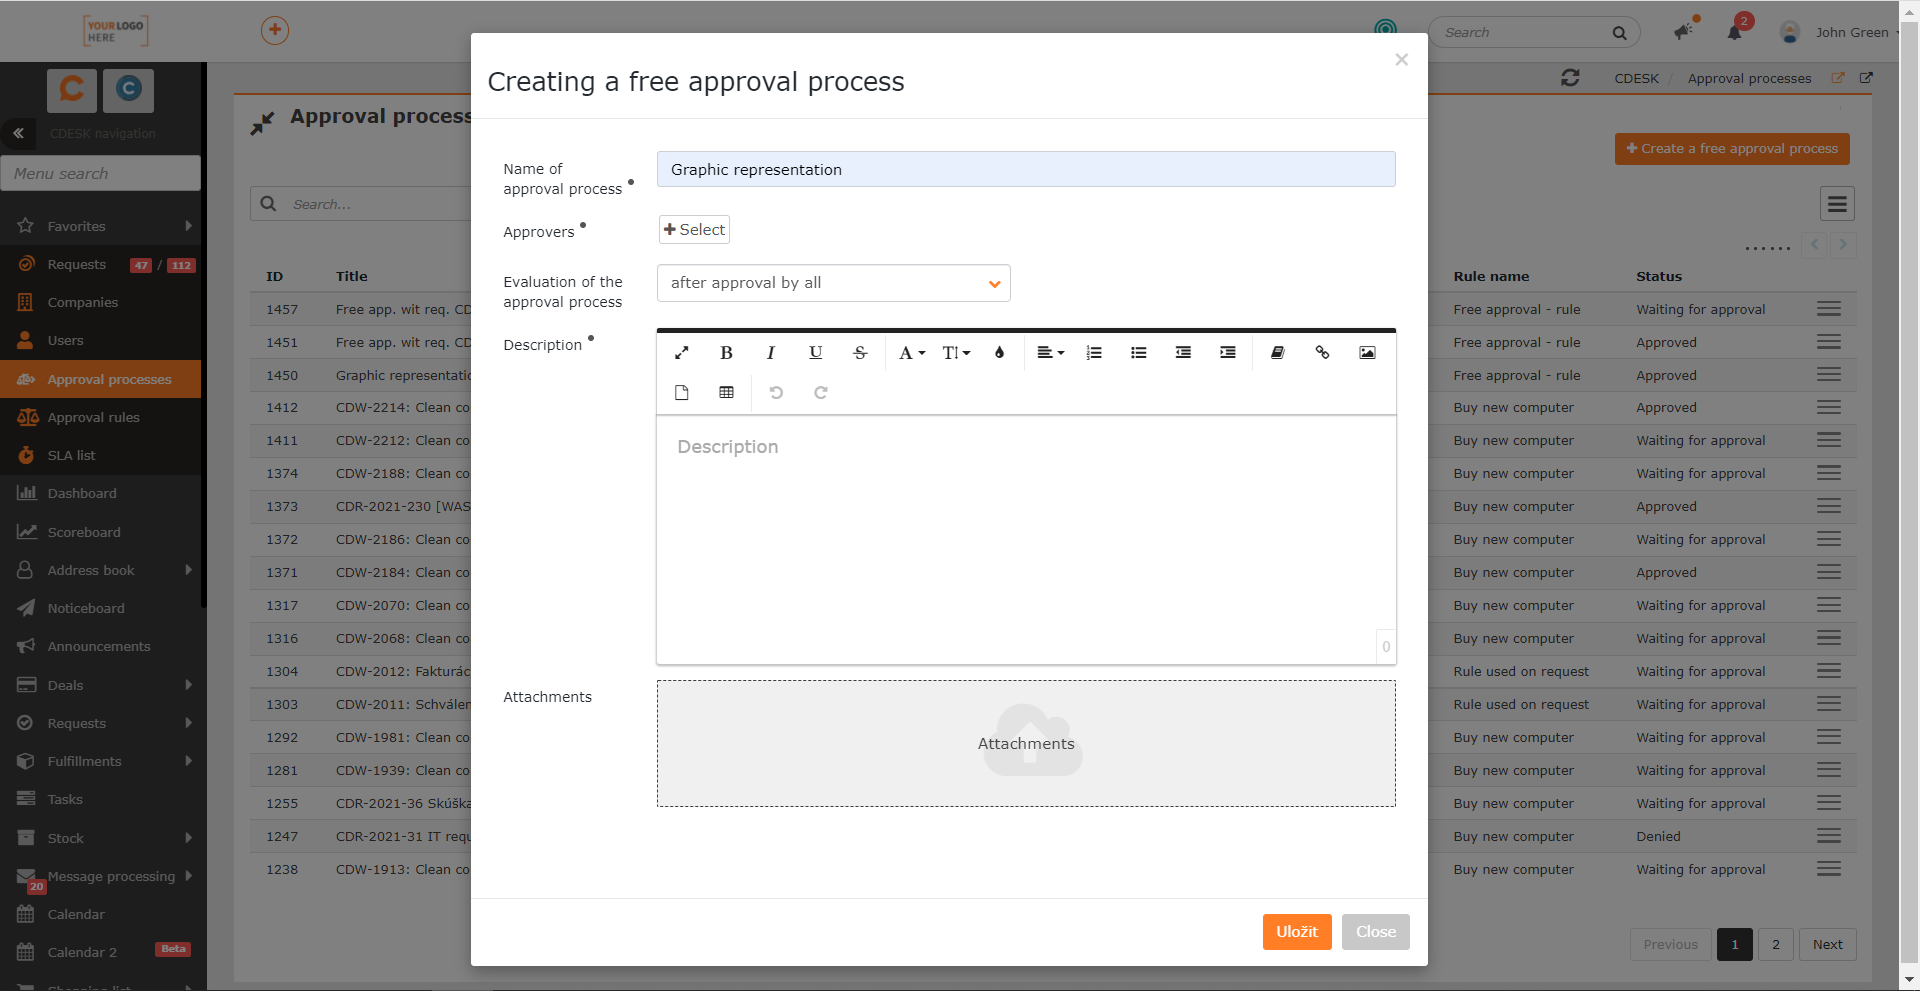 Form for creating a free approval process